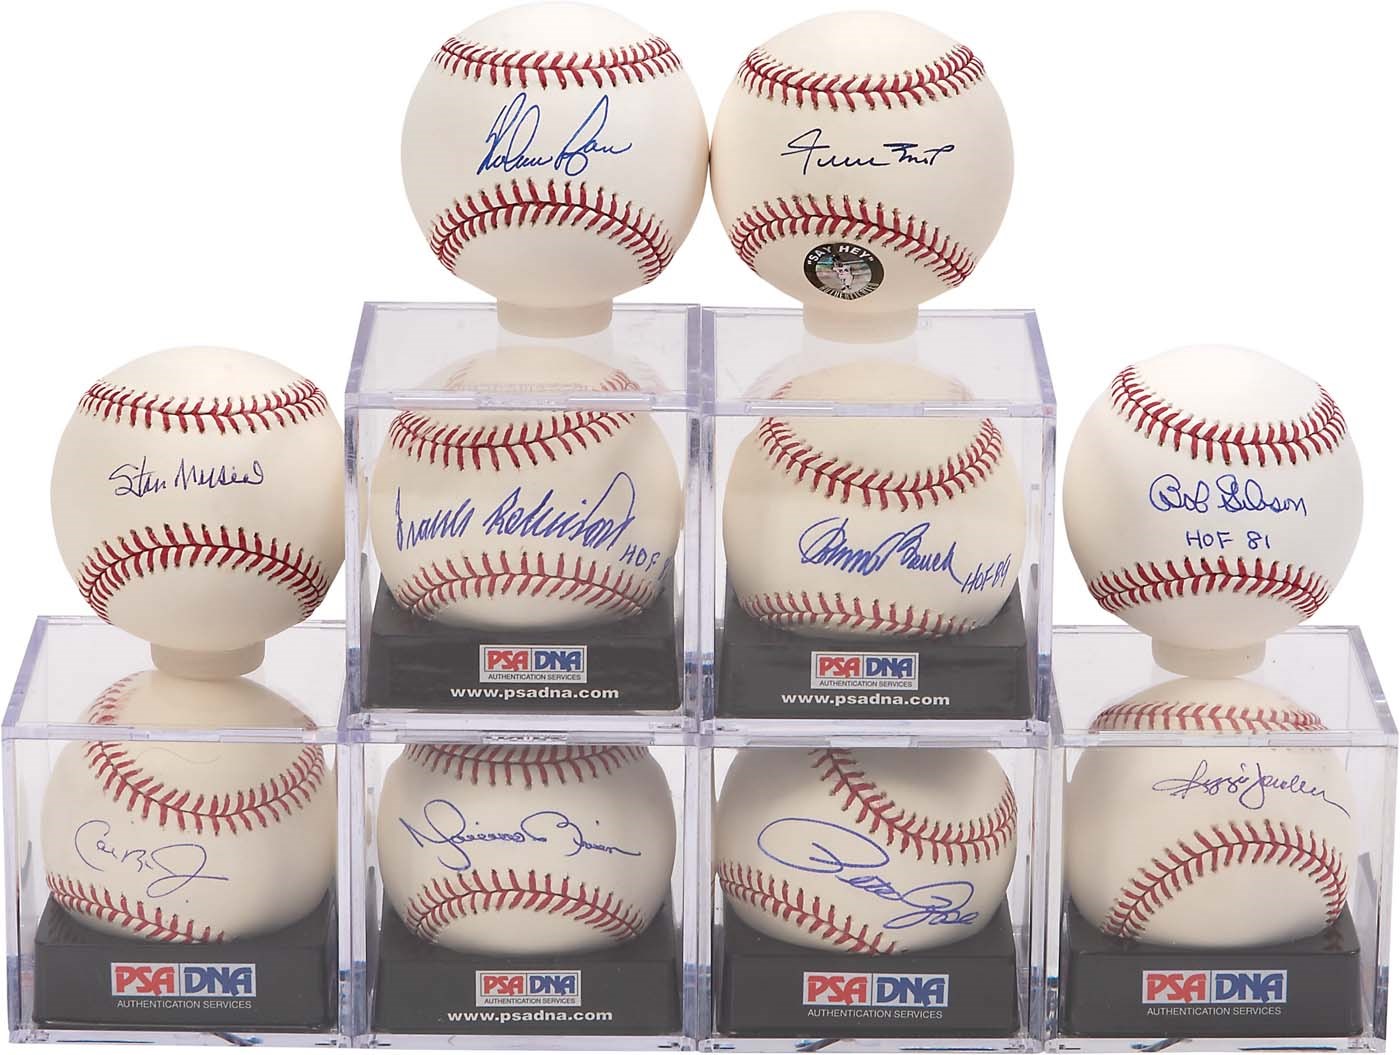 Baseball Autographs - High Grade Hall of Famers and Legends Signed Baseballs with 7 Graded by PSA (10)